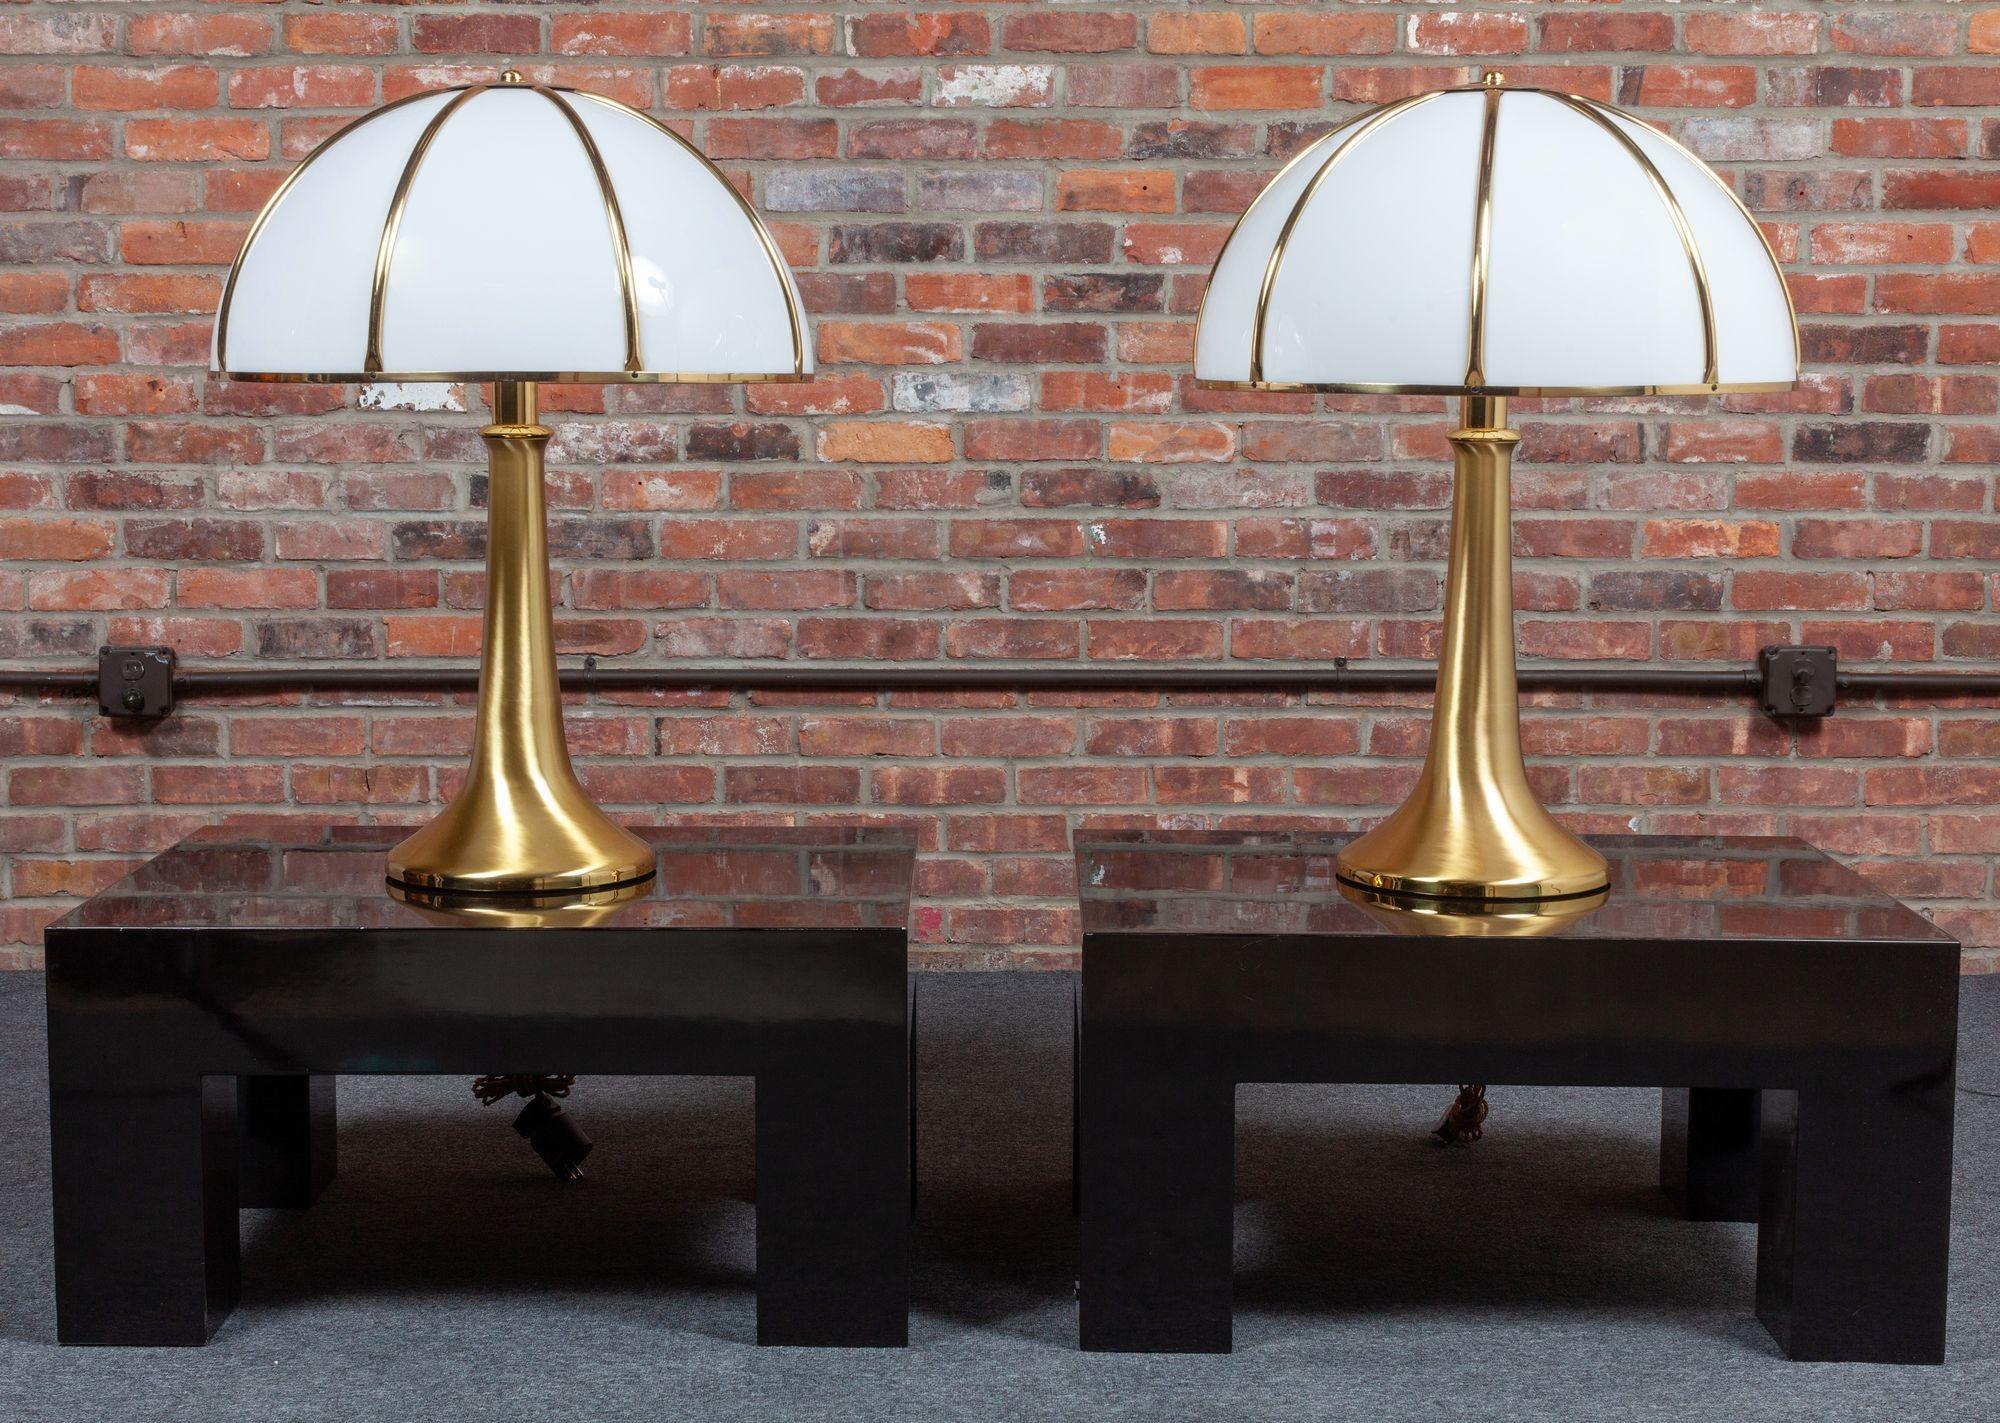 Monumental pair of Gabriella Crespi “Fungo” table lamps in brushed brass and white acrylic (ca. 1970, Italy).
Among the larger examples Crespi designed composed of oversized brass and white acrylic dome shades atop brushed brass trumpet bases with